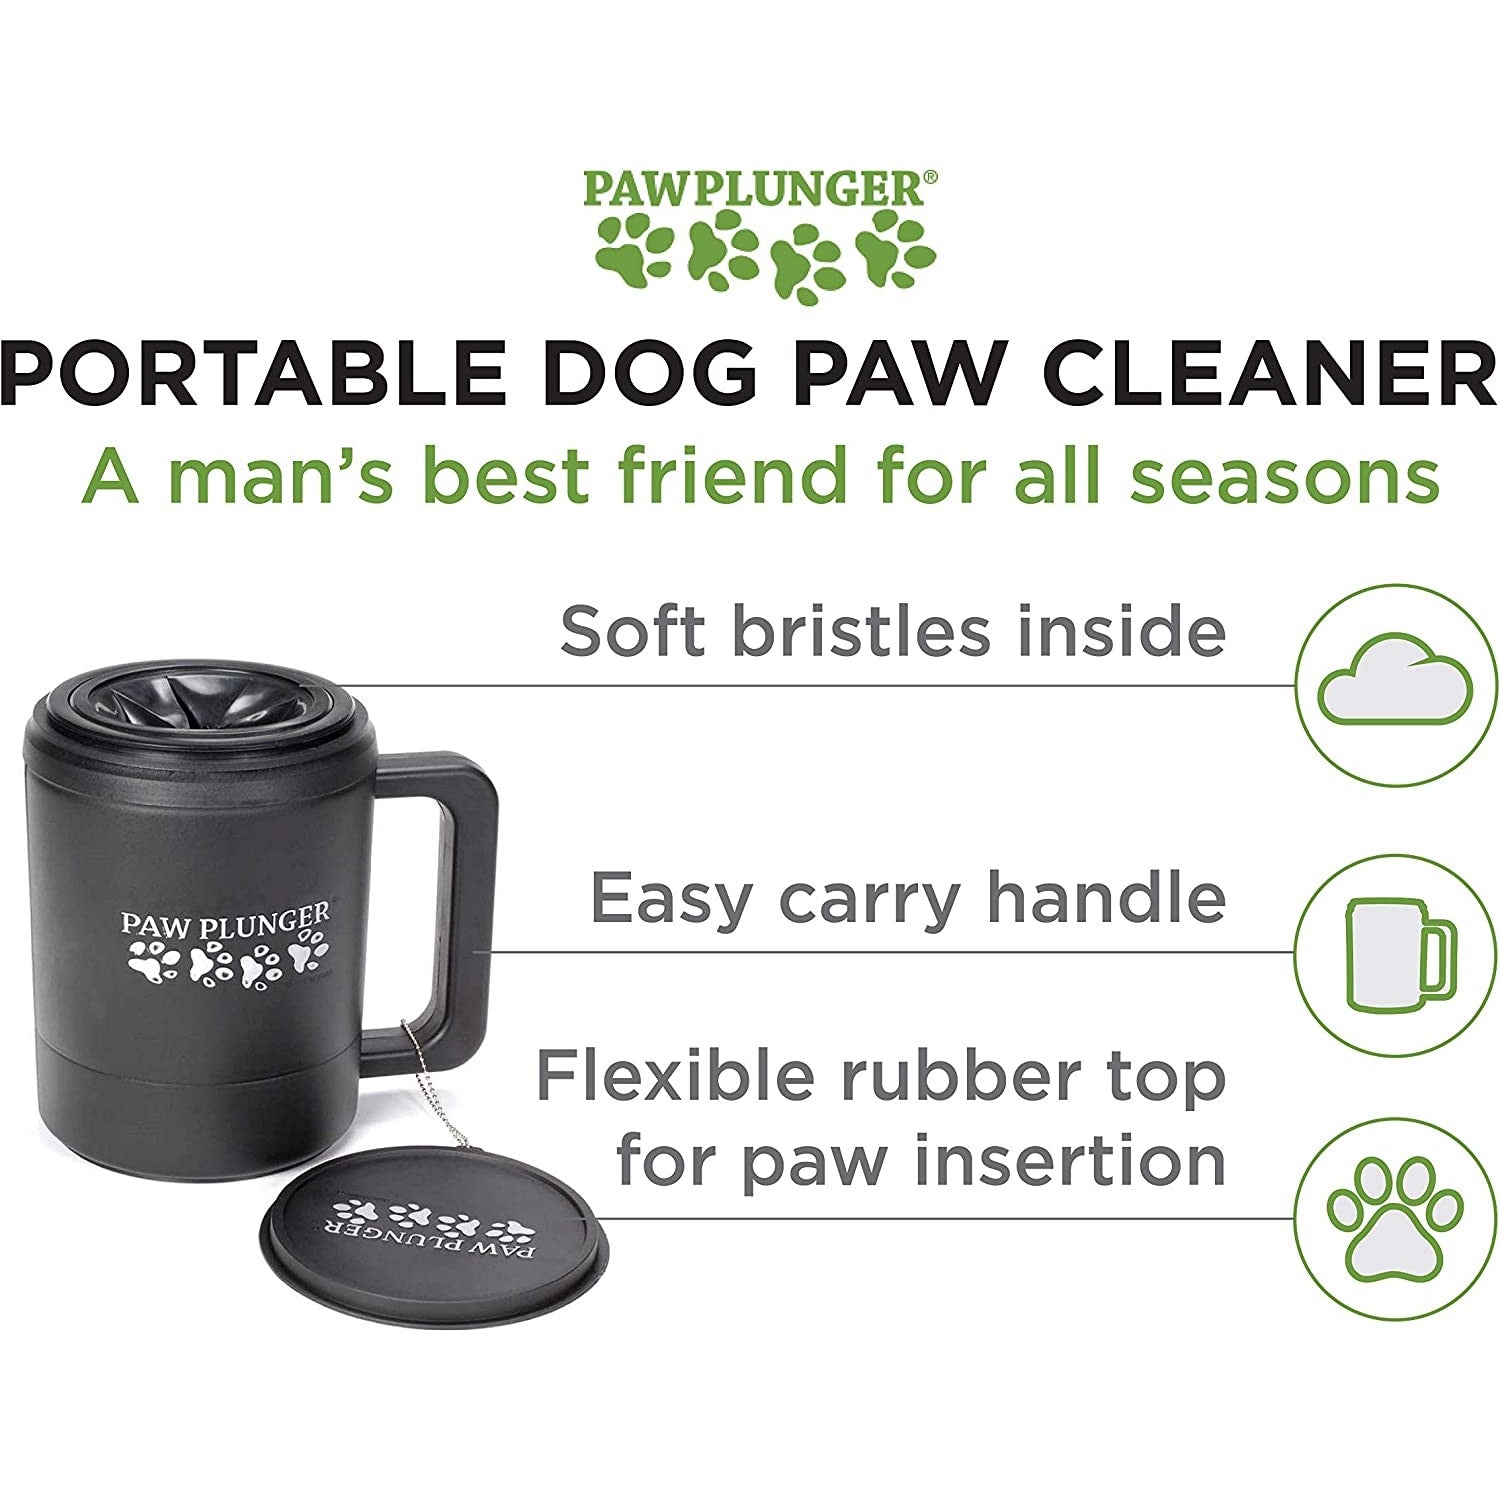 Detailed information about a paw plunger dog paw cleaner. The text says, 'Soft bristles inside. Easy carry handle. Flexible rubber top for paw insertion.'